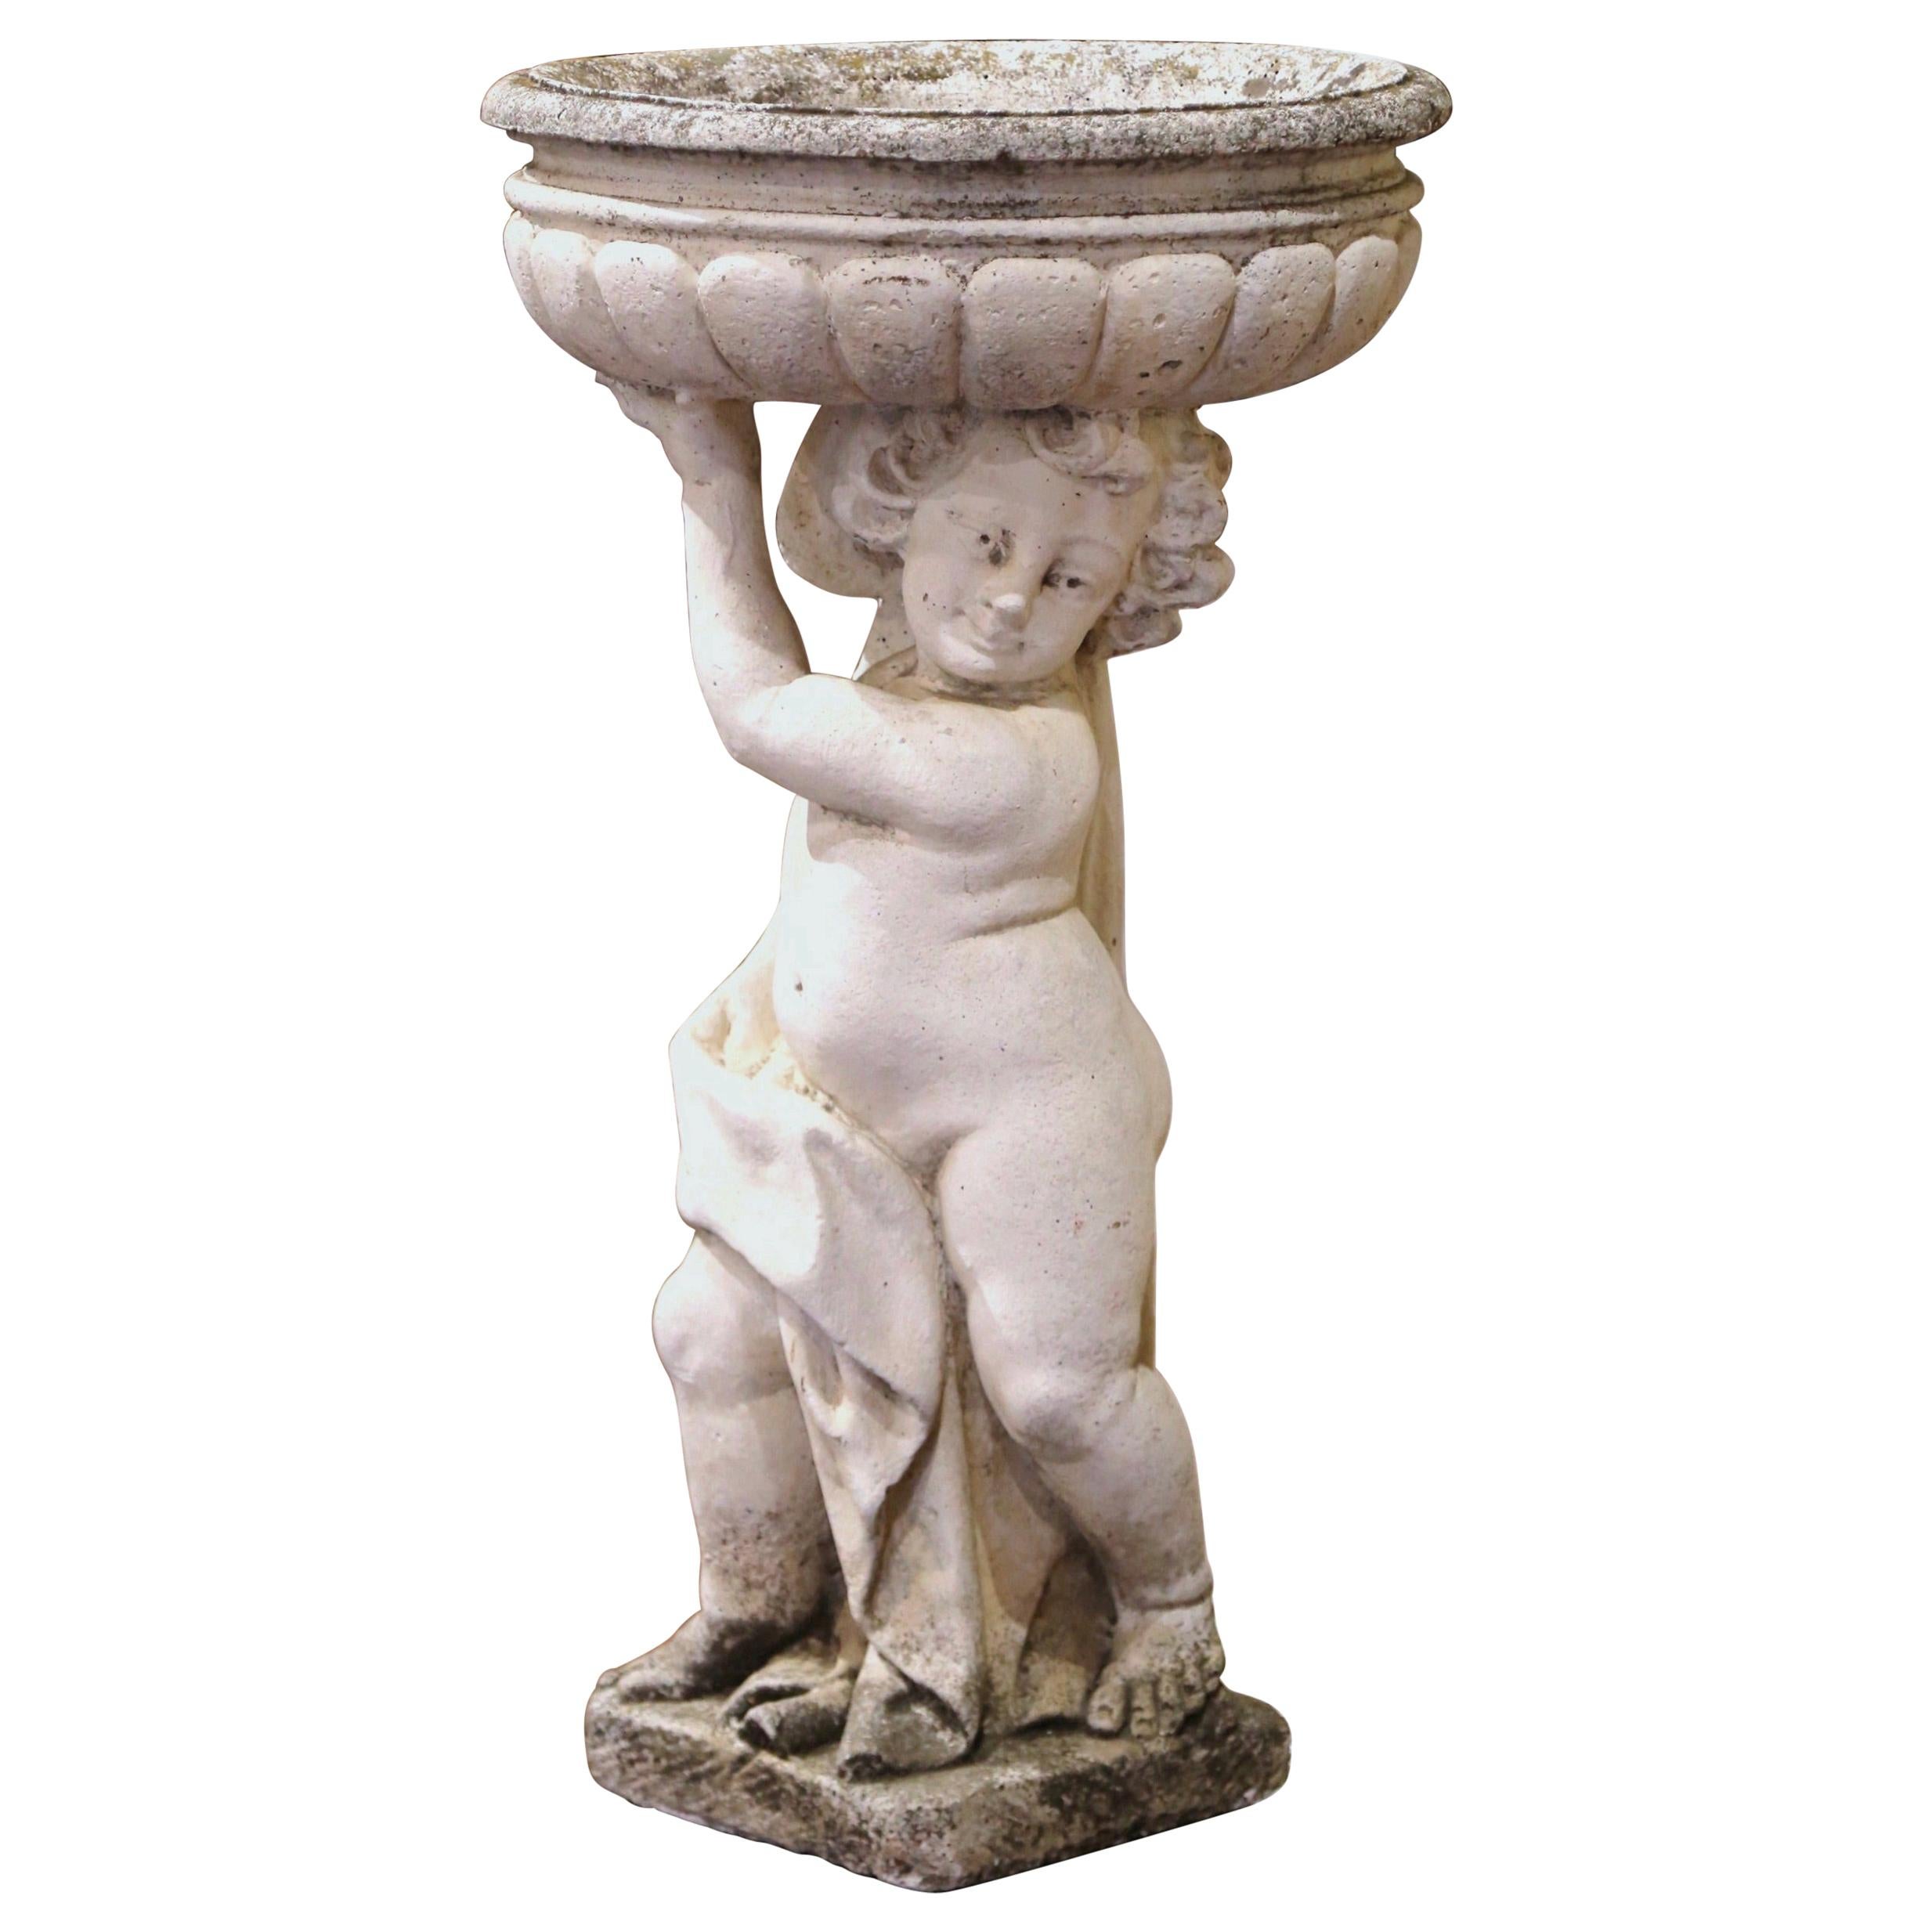 19th Century French Carved and Weathered Outdoor Stone Planter with Cherub